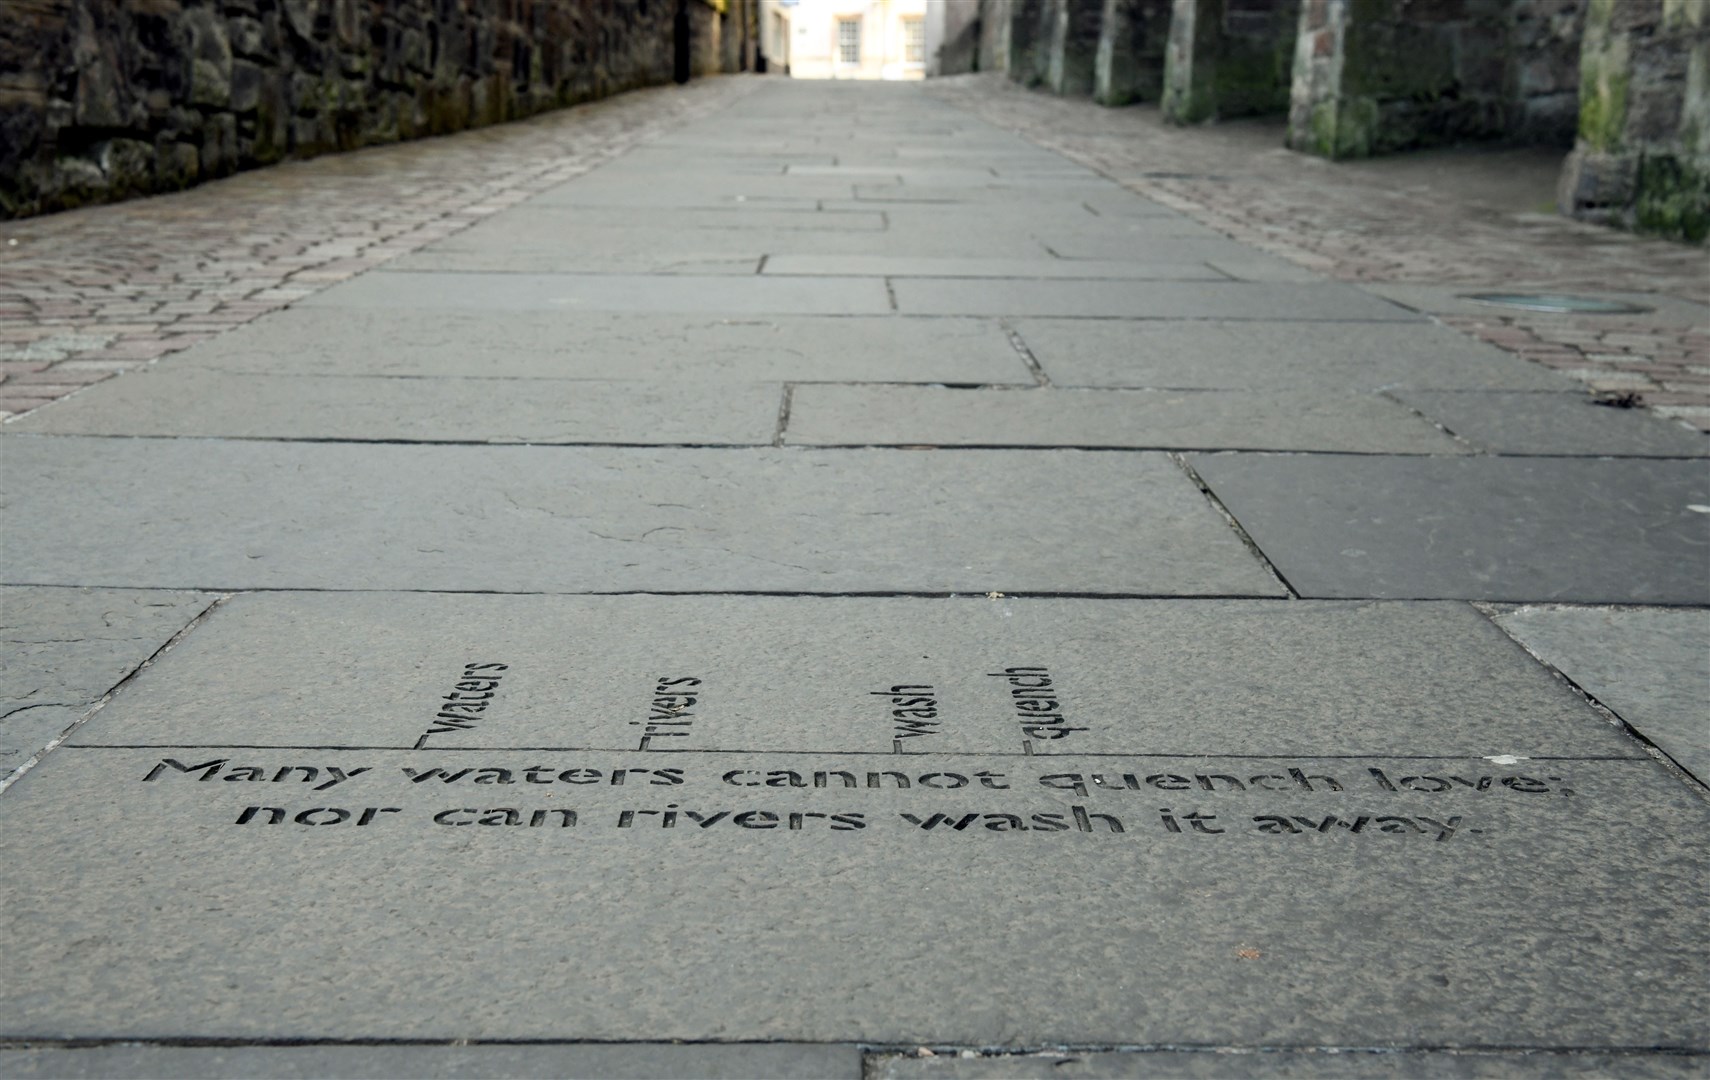 Songs of Solomon 8:7 verse on the ground on Church Lane Picture: James Mackenzie